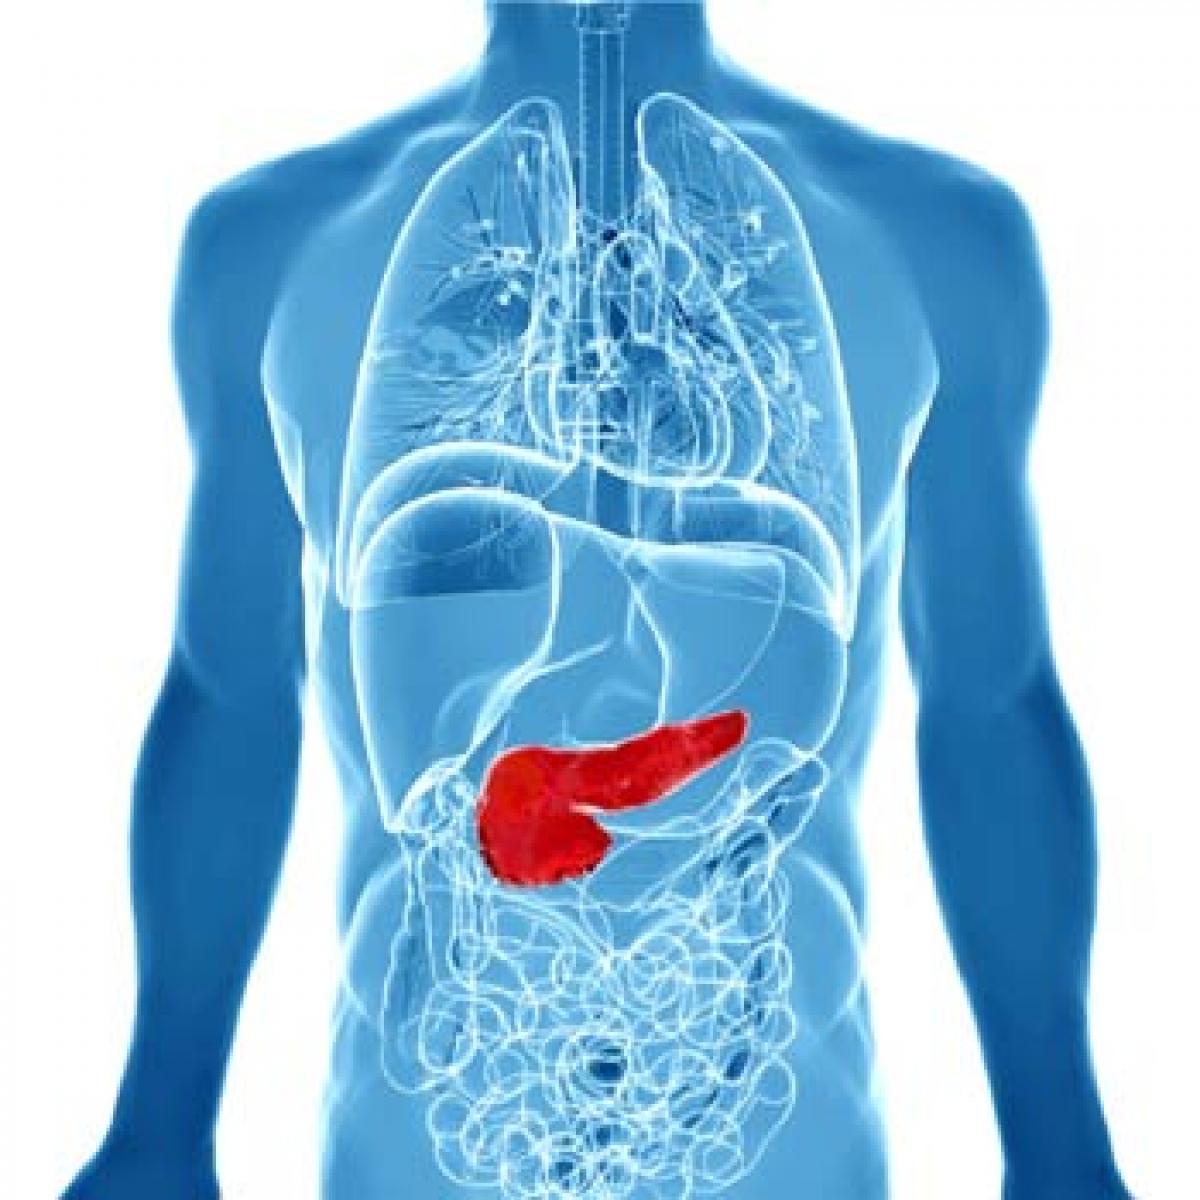 Implantable device may soon shrink pancreatic tumours